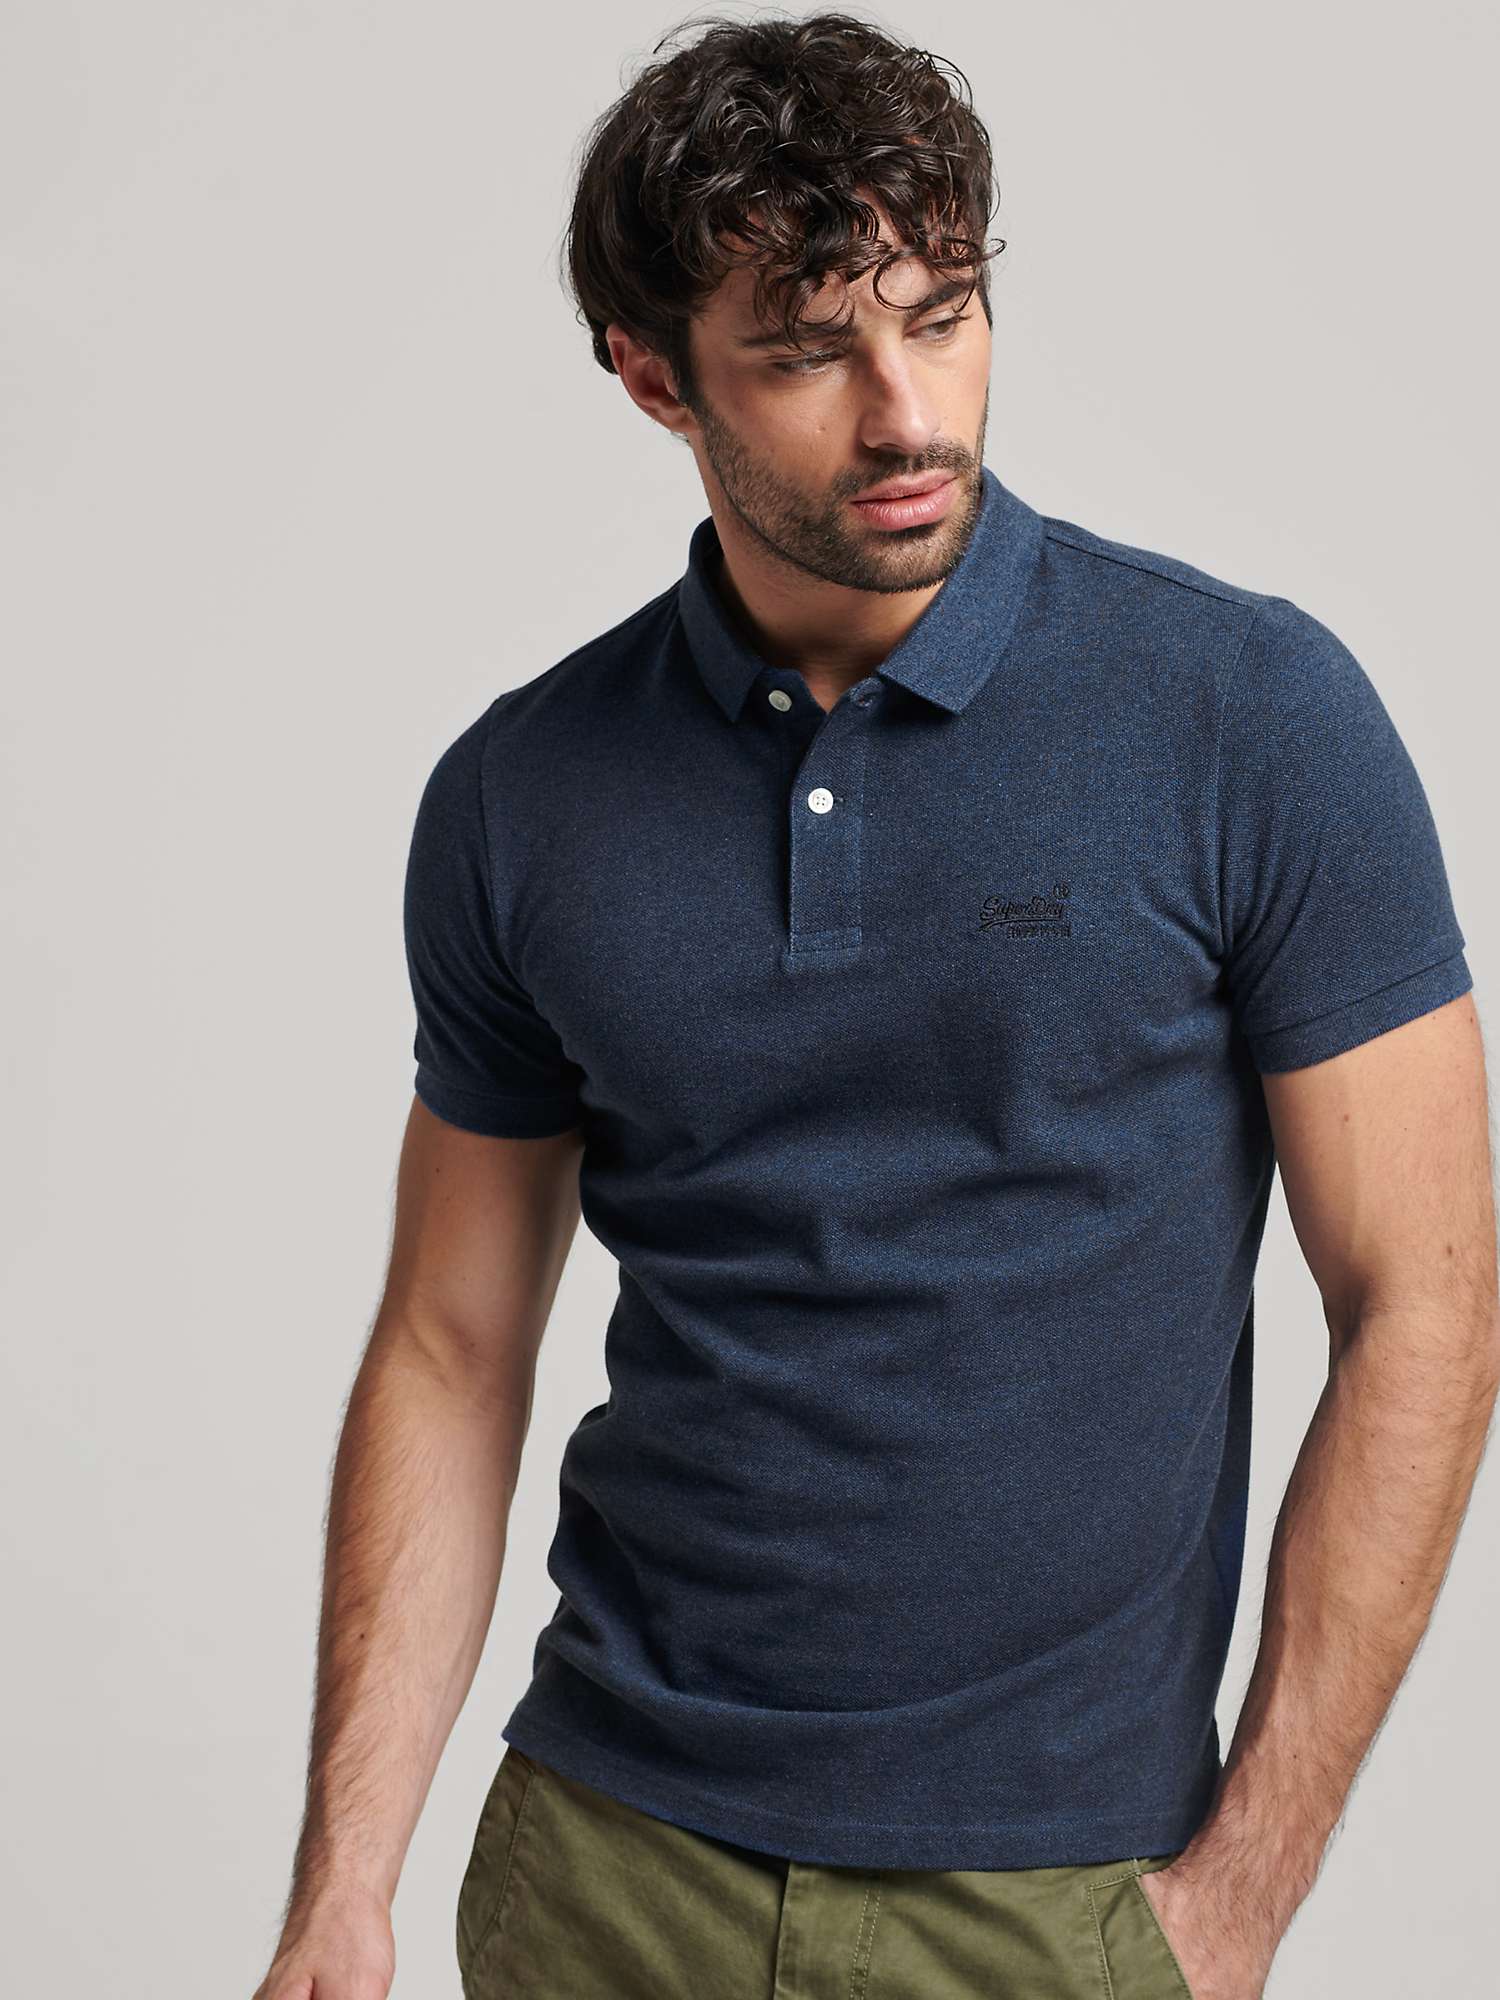 Superdry Classic Pique Polo Shirt, Bright Blue Marl at John Lewis & Partners